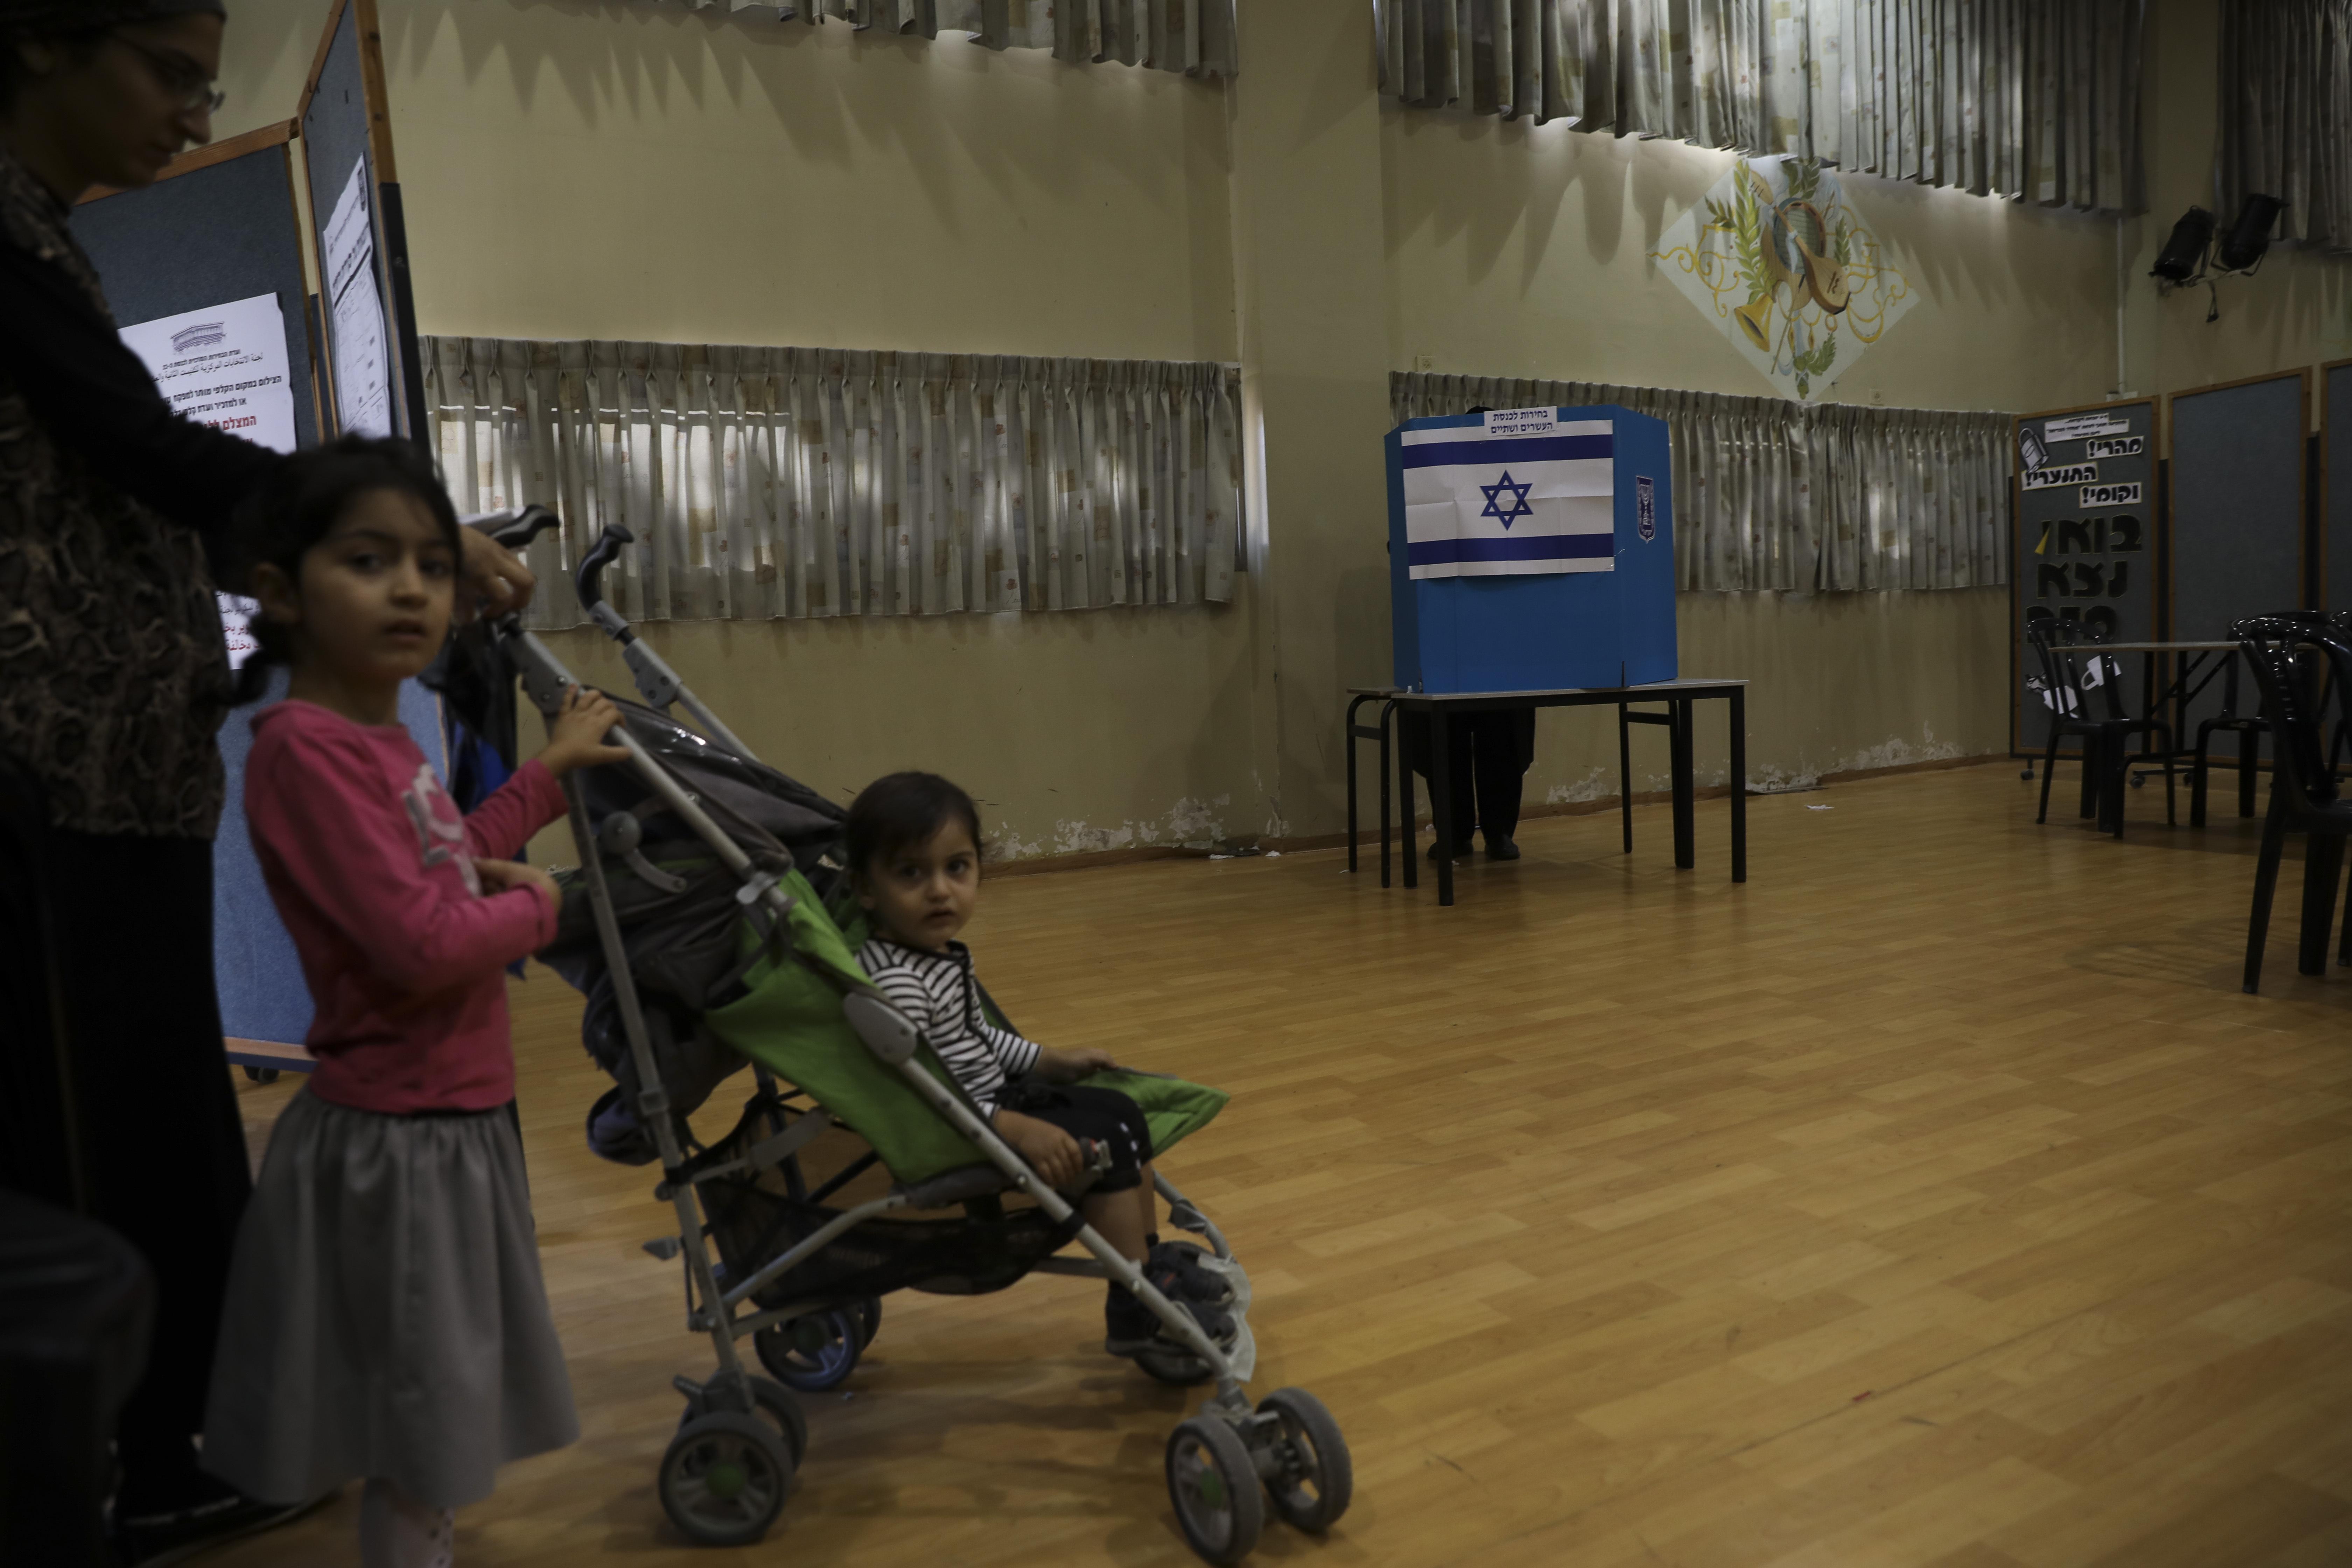 A man votes in Bnei Brak, Israel, Tuesday, Sept. 17, 2019. Israelis began voting Tuesday in an unprecedented repeat election that will decide whether longtime Prime Minister Benjamin Netanyahu stays in power despite a looming indictment on corruption charges. .(AP Photo/Oded Balilty)